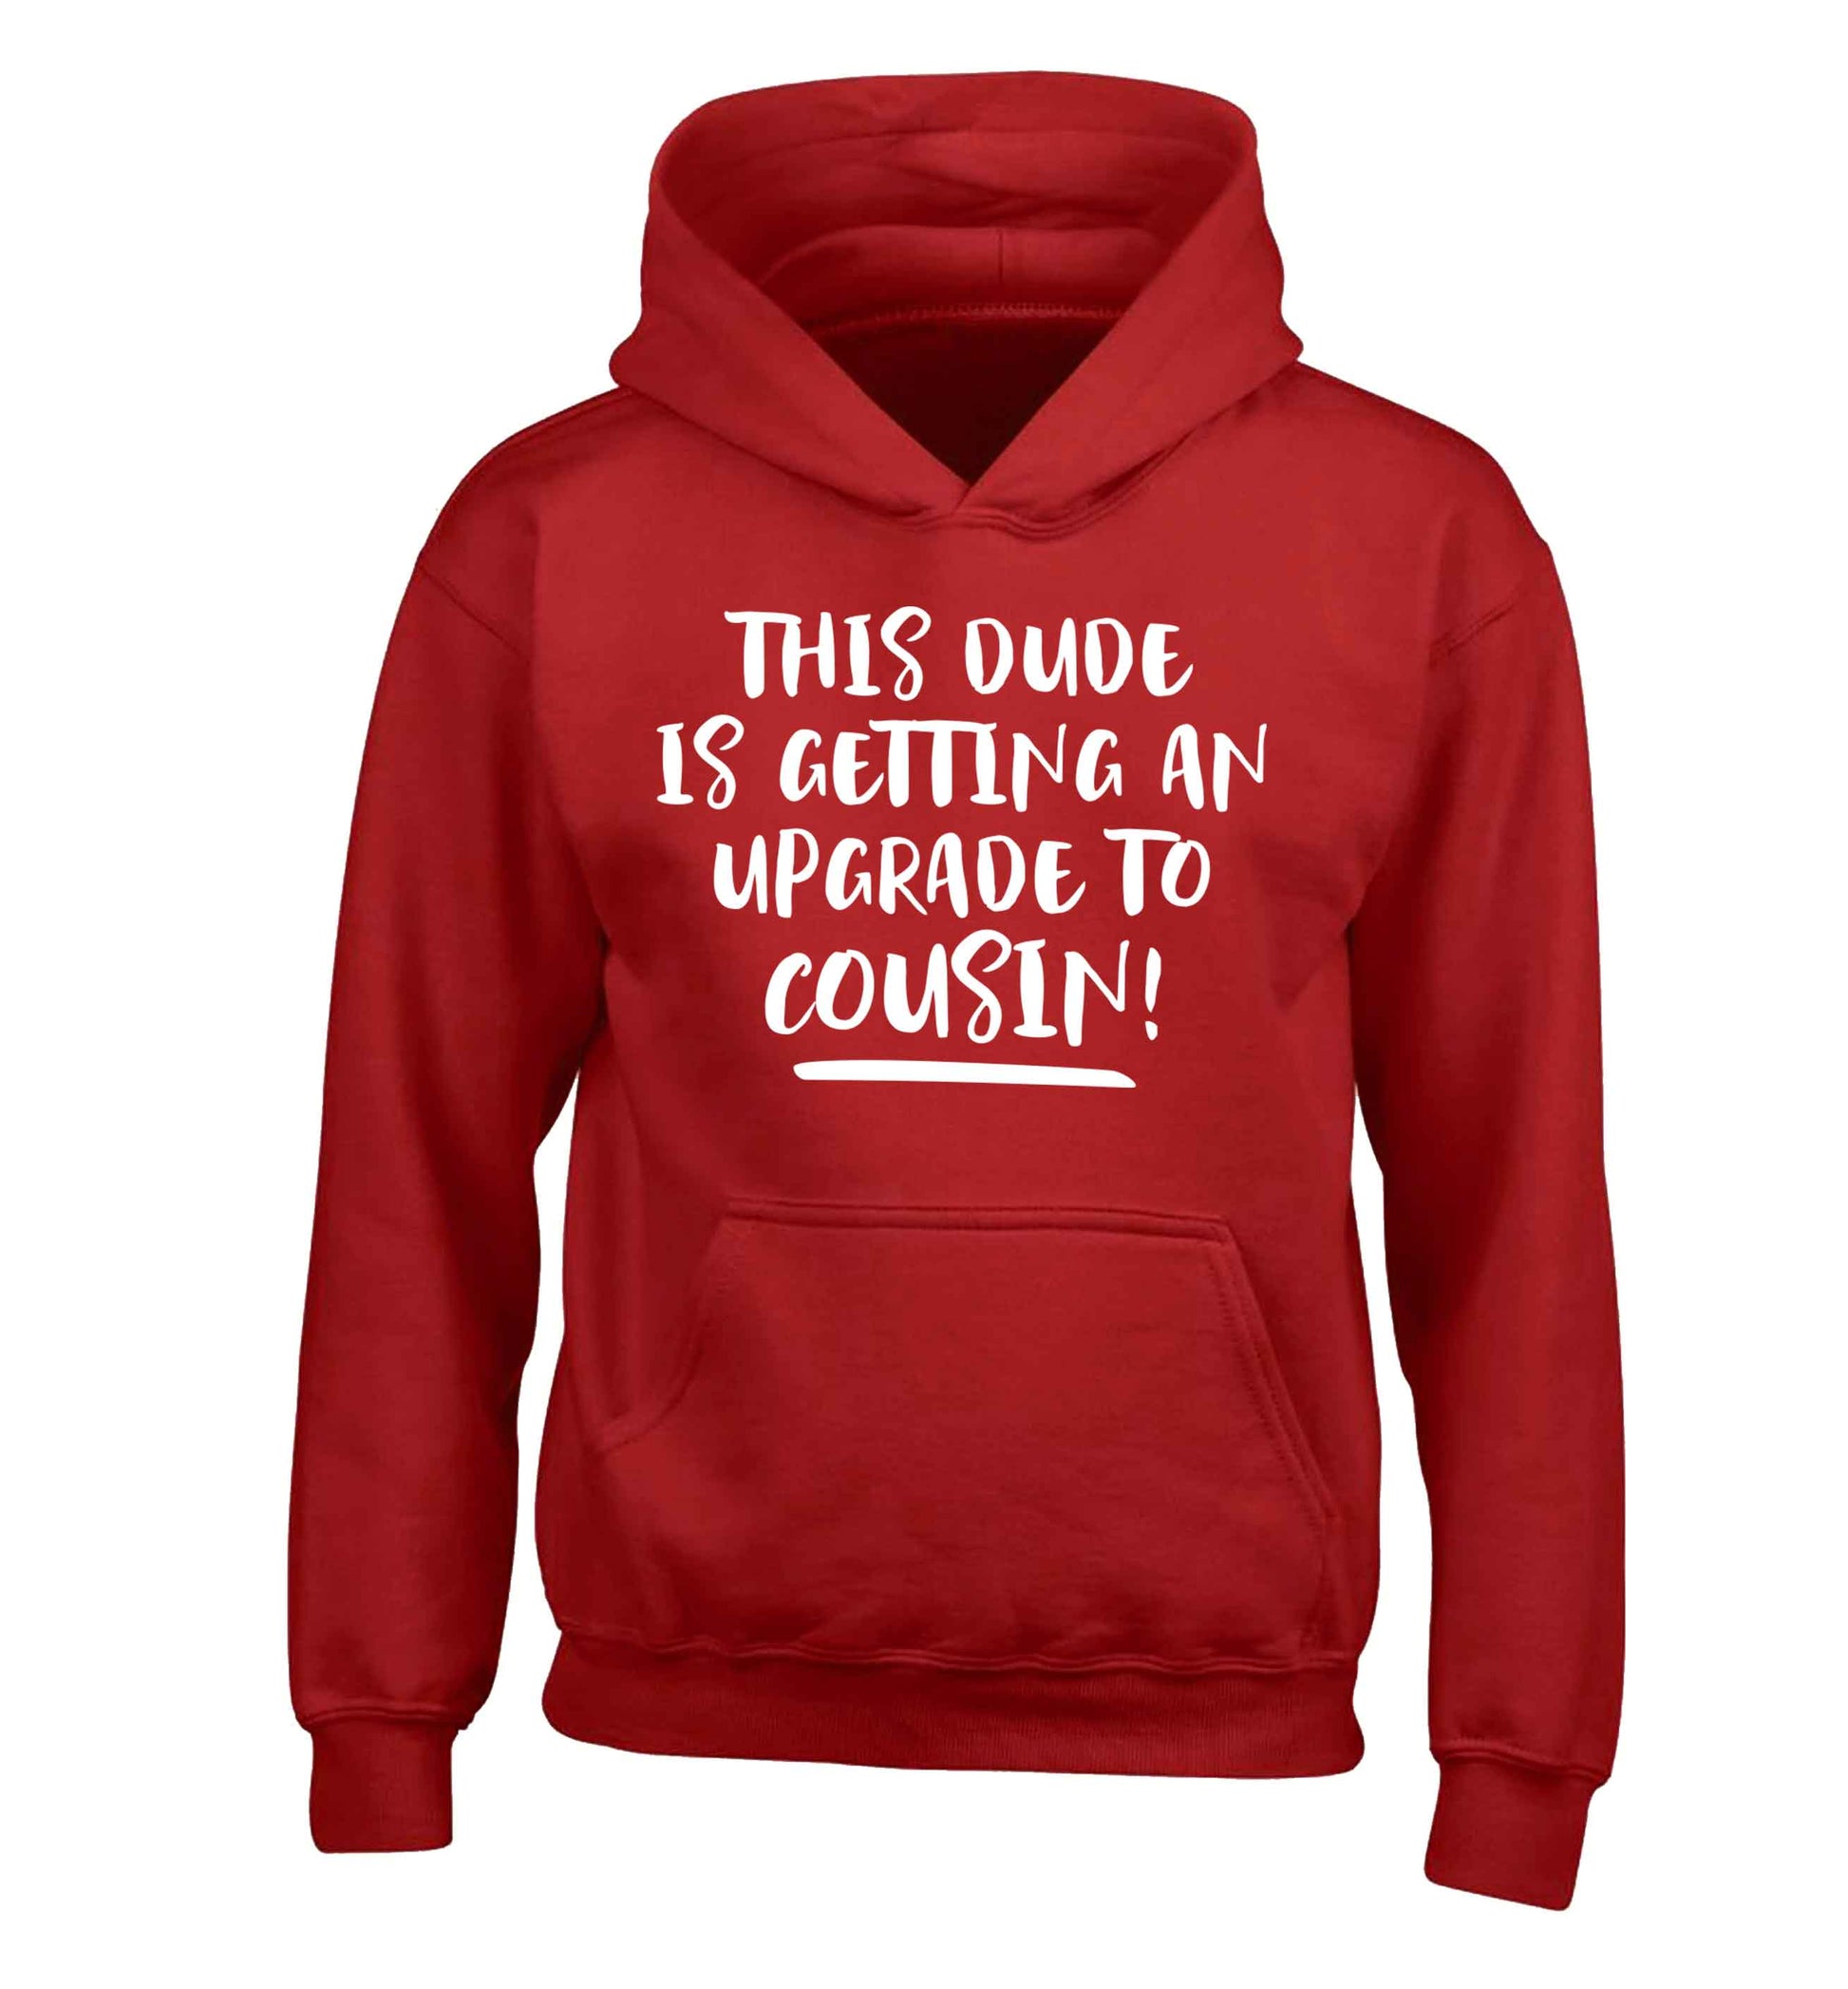 This dude is getting an upgrade to cousin! children's red hoodie 12-13 Years